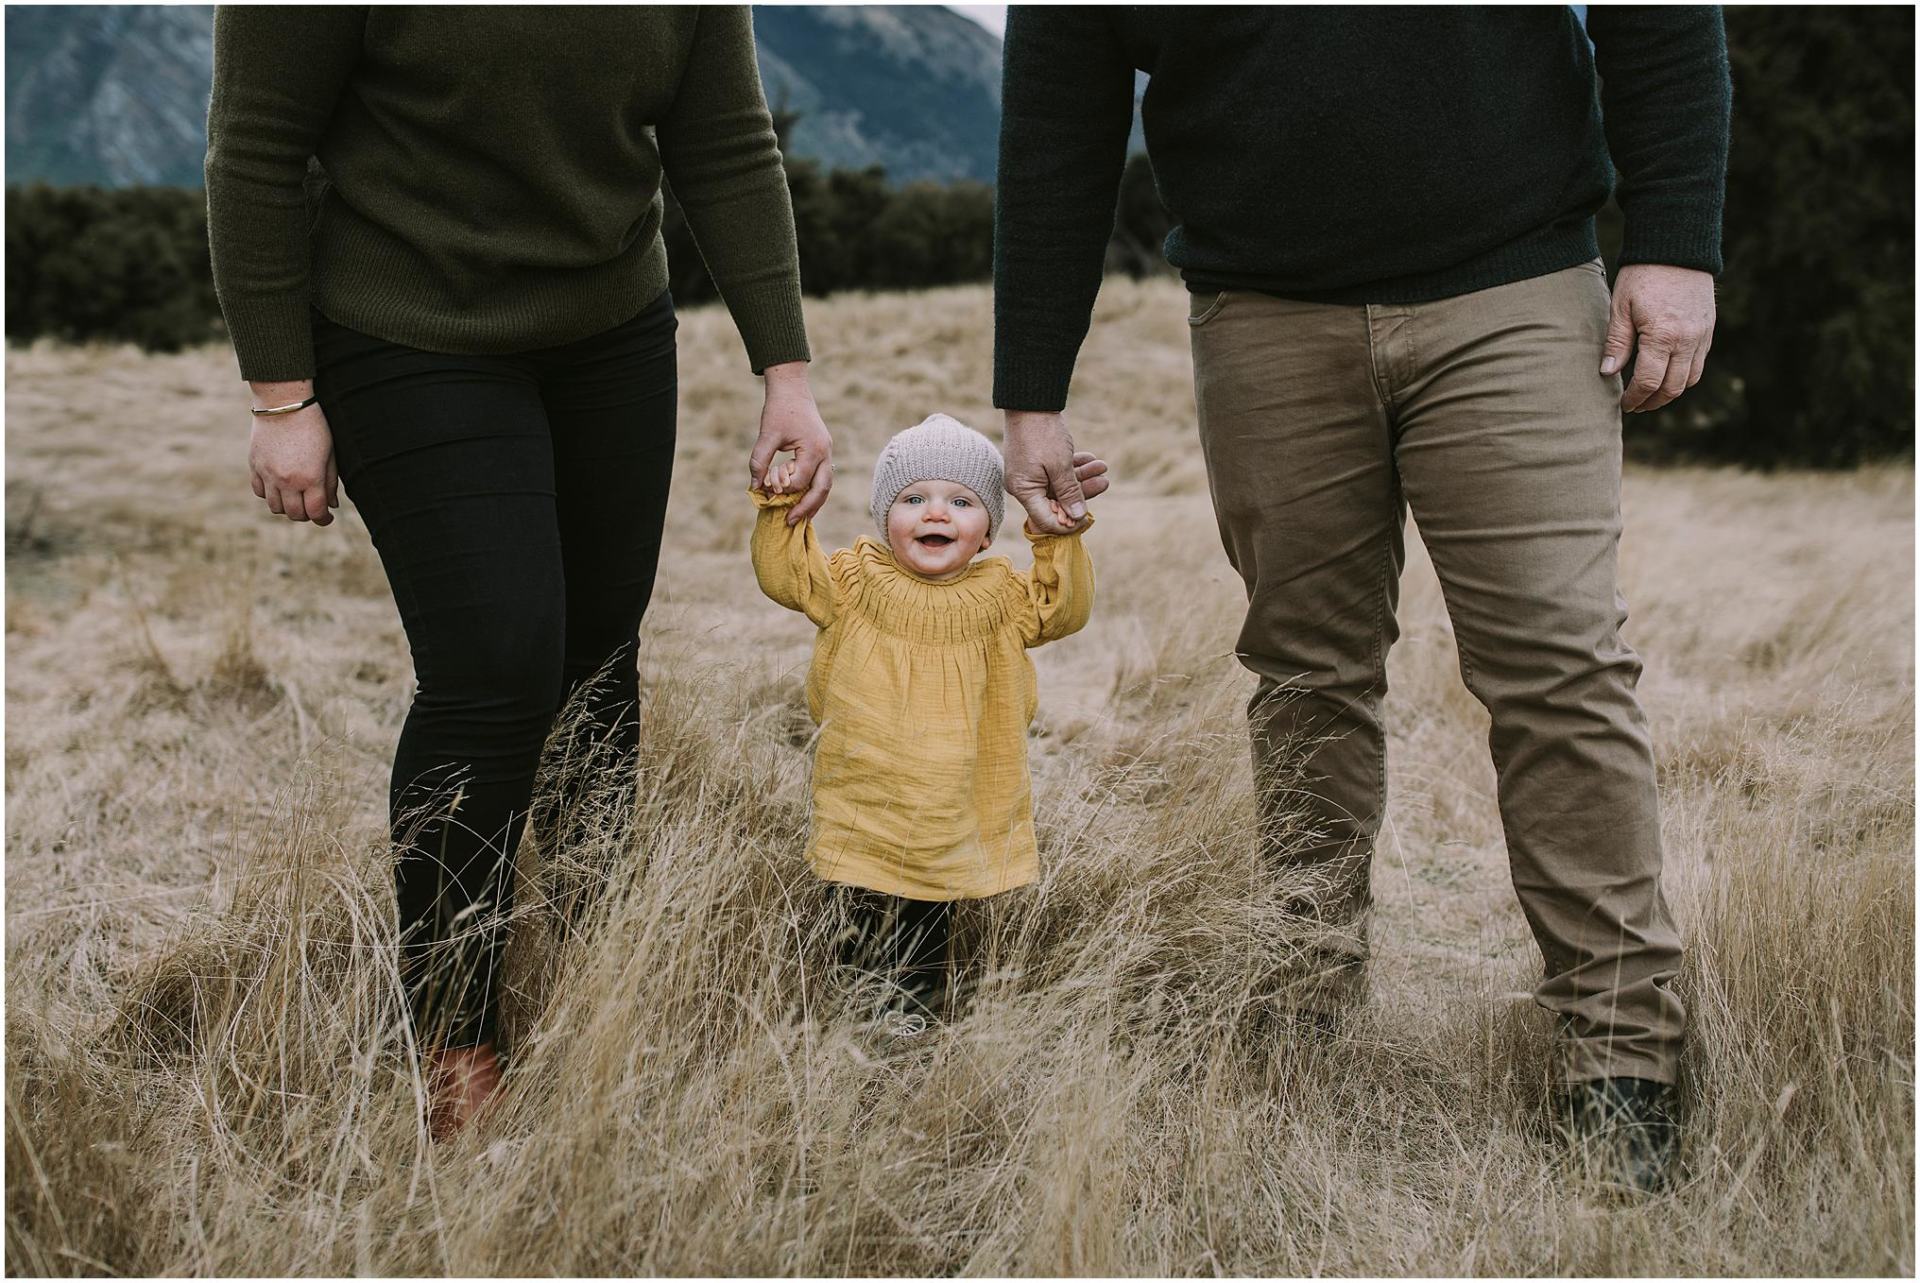 Charlotte Kiri Photography - Family Photography of a couple holding hands with a young child as they walk through the grass in Wanaka, New Zealand.